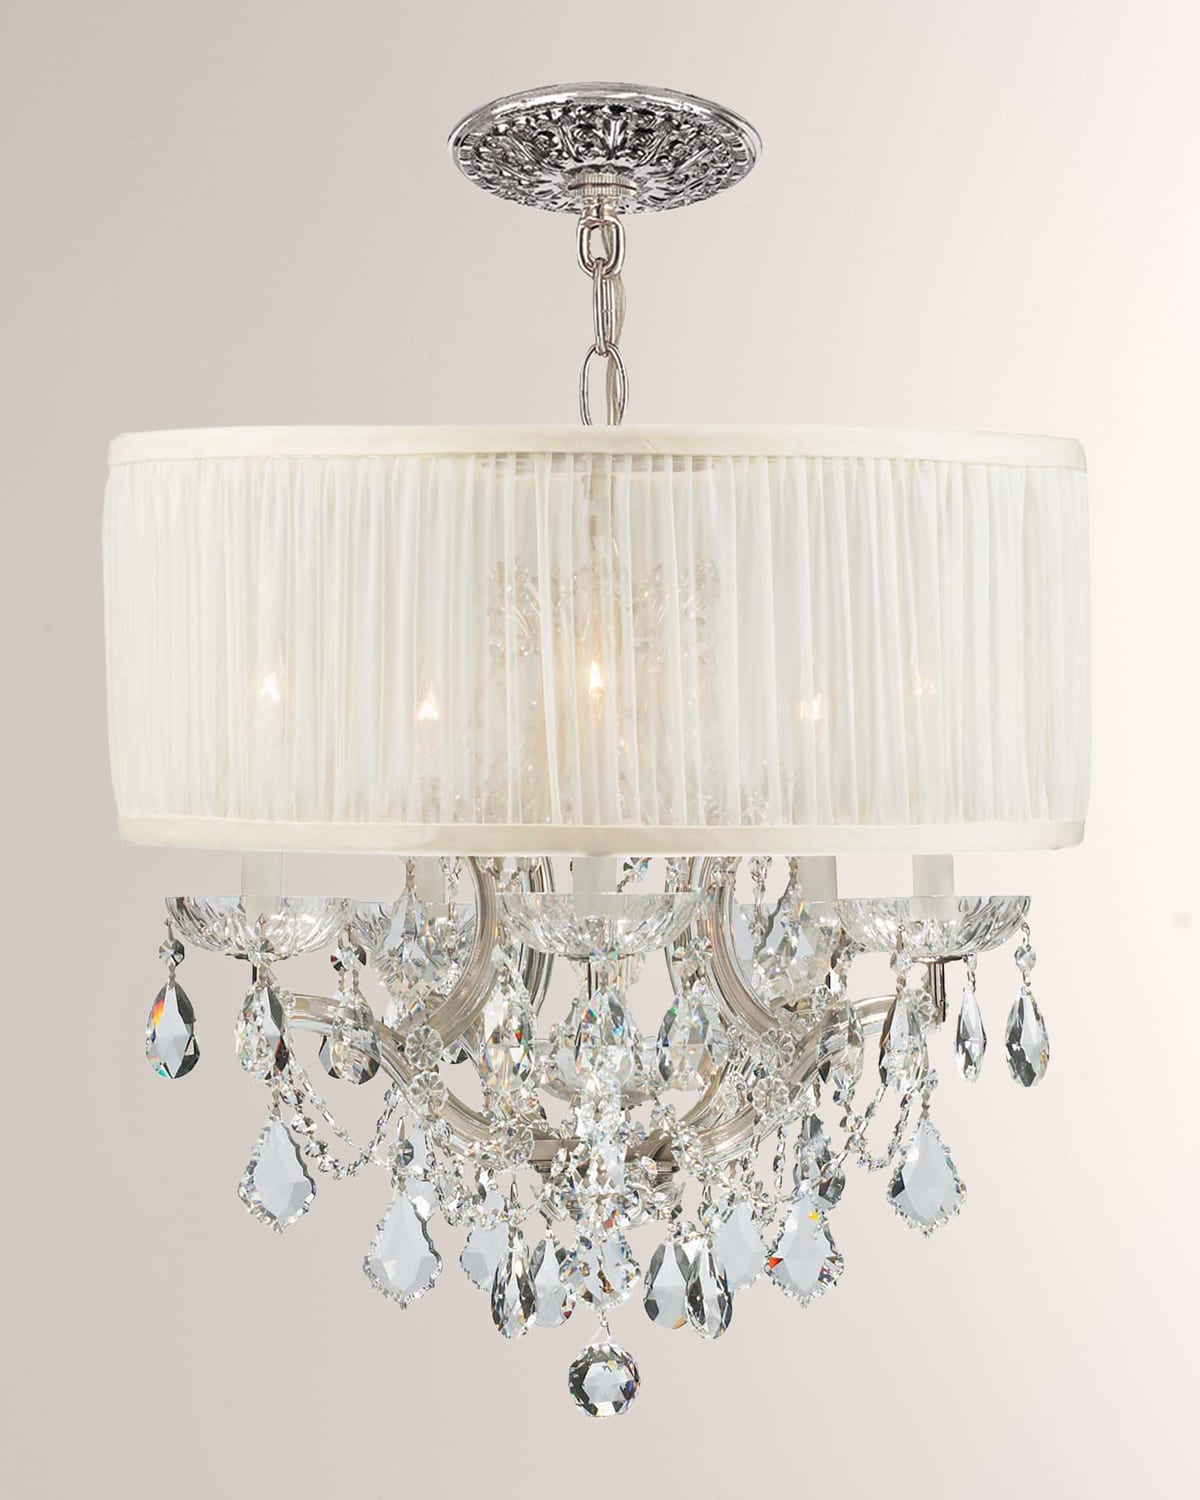 Crystorama Brentwood 6-Light Elements Crystal Chrome Drum Shade Chandelier